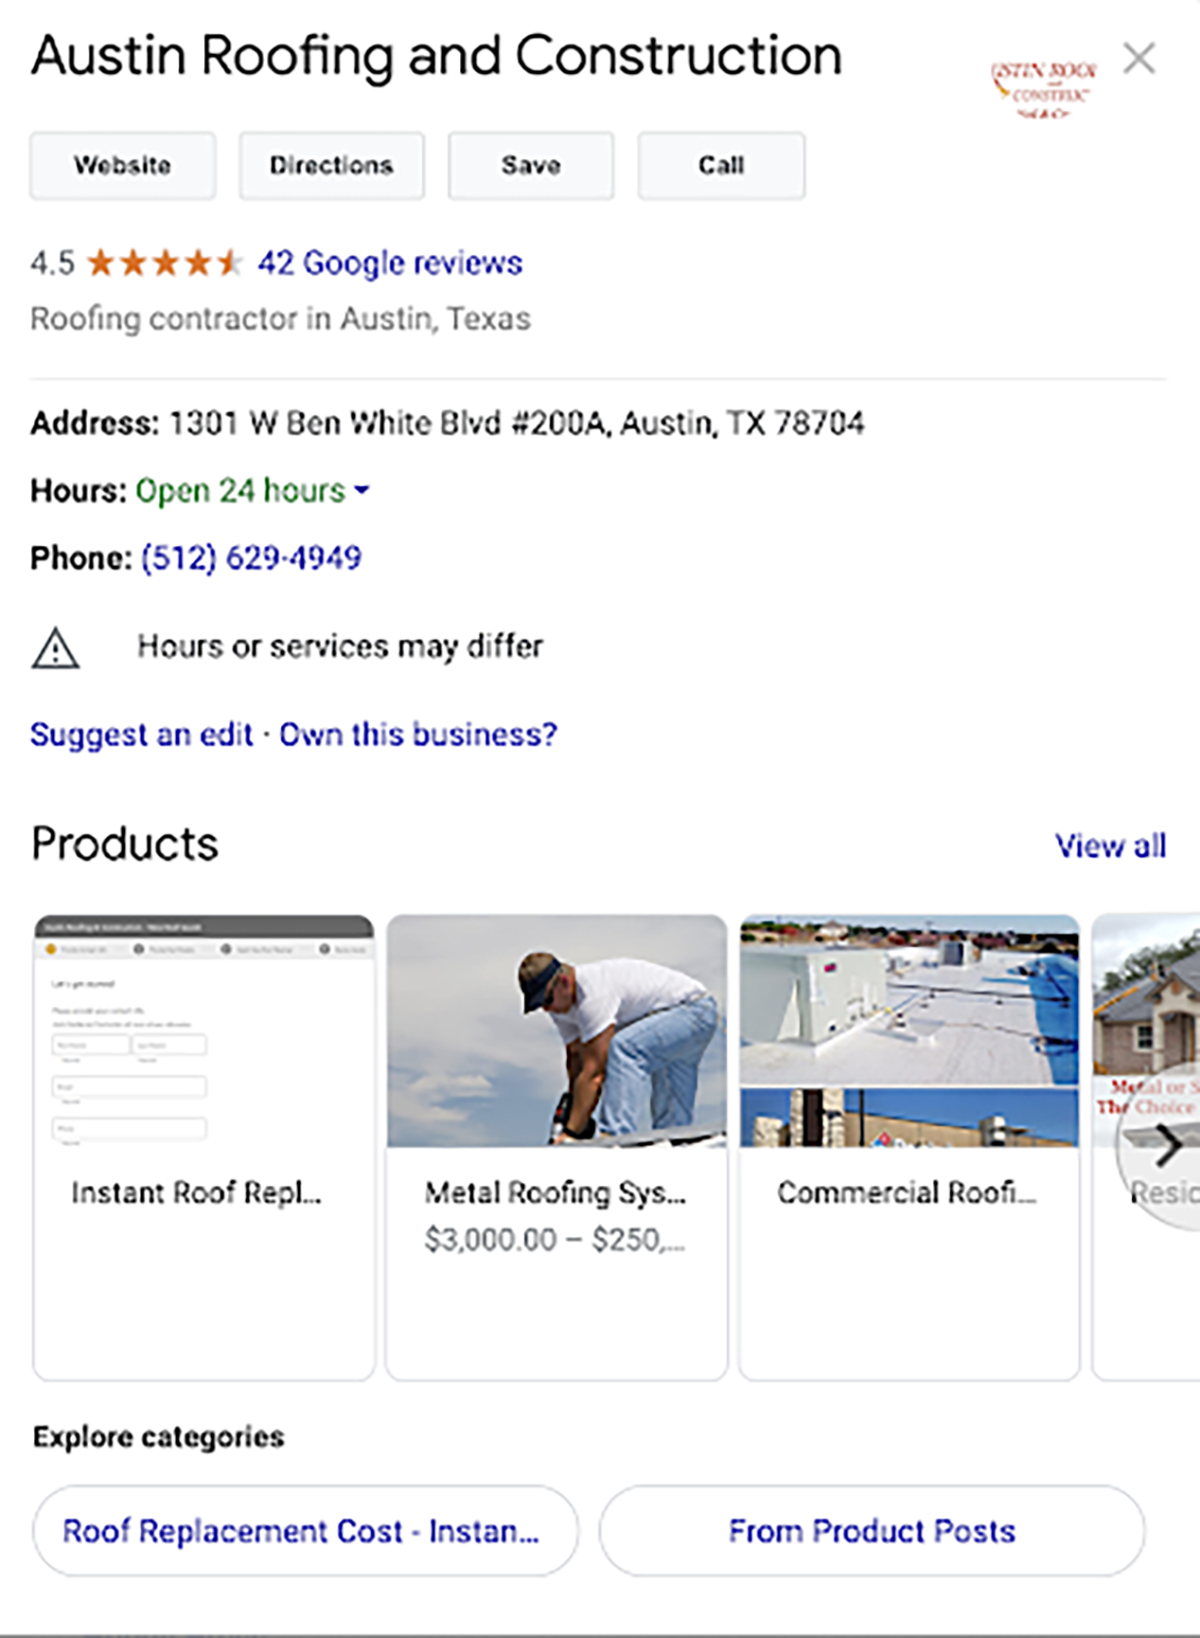 screenshot of Austin Roofing and Construction’s Google Business Profile